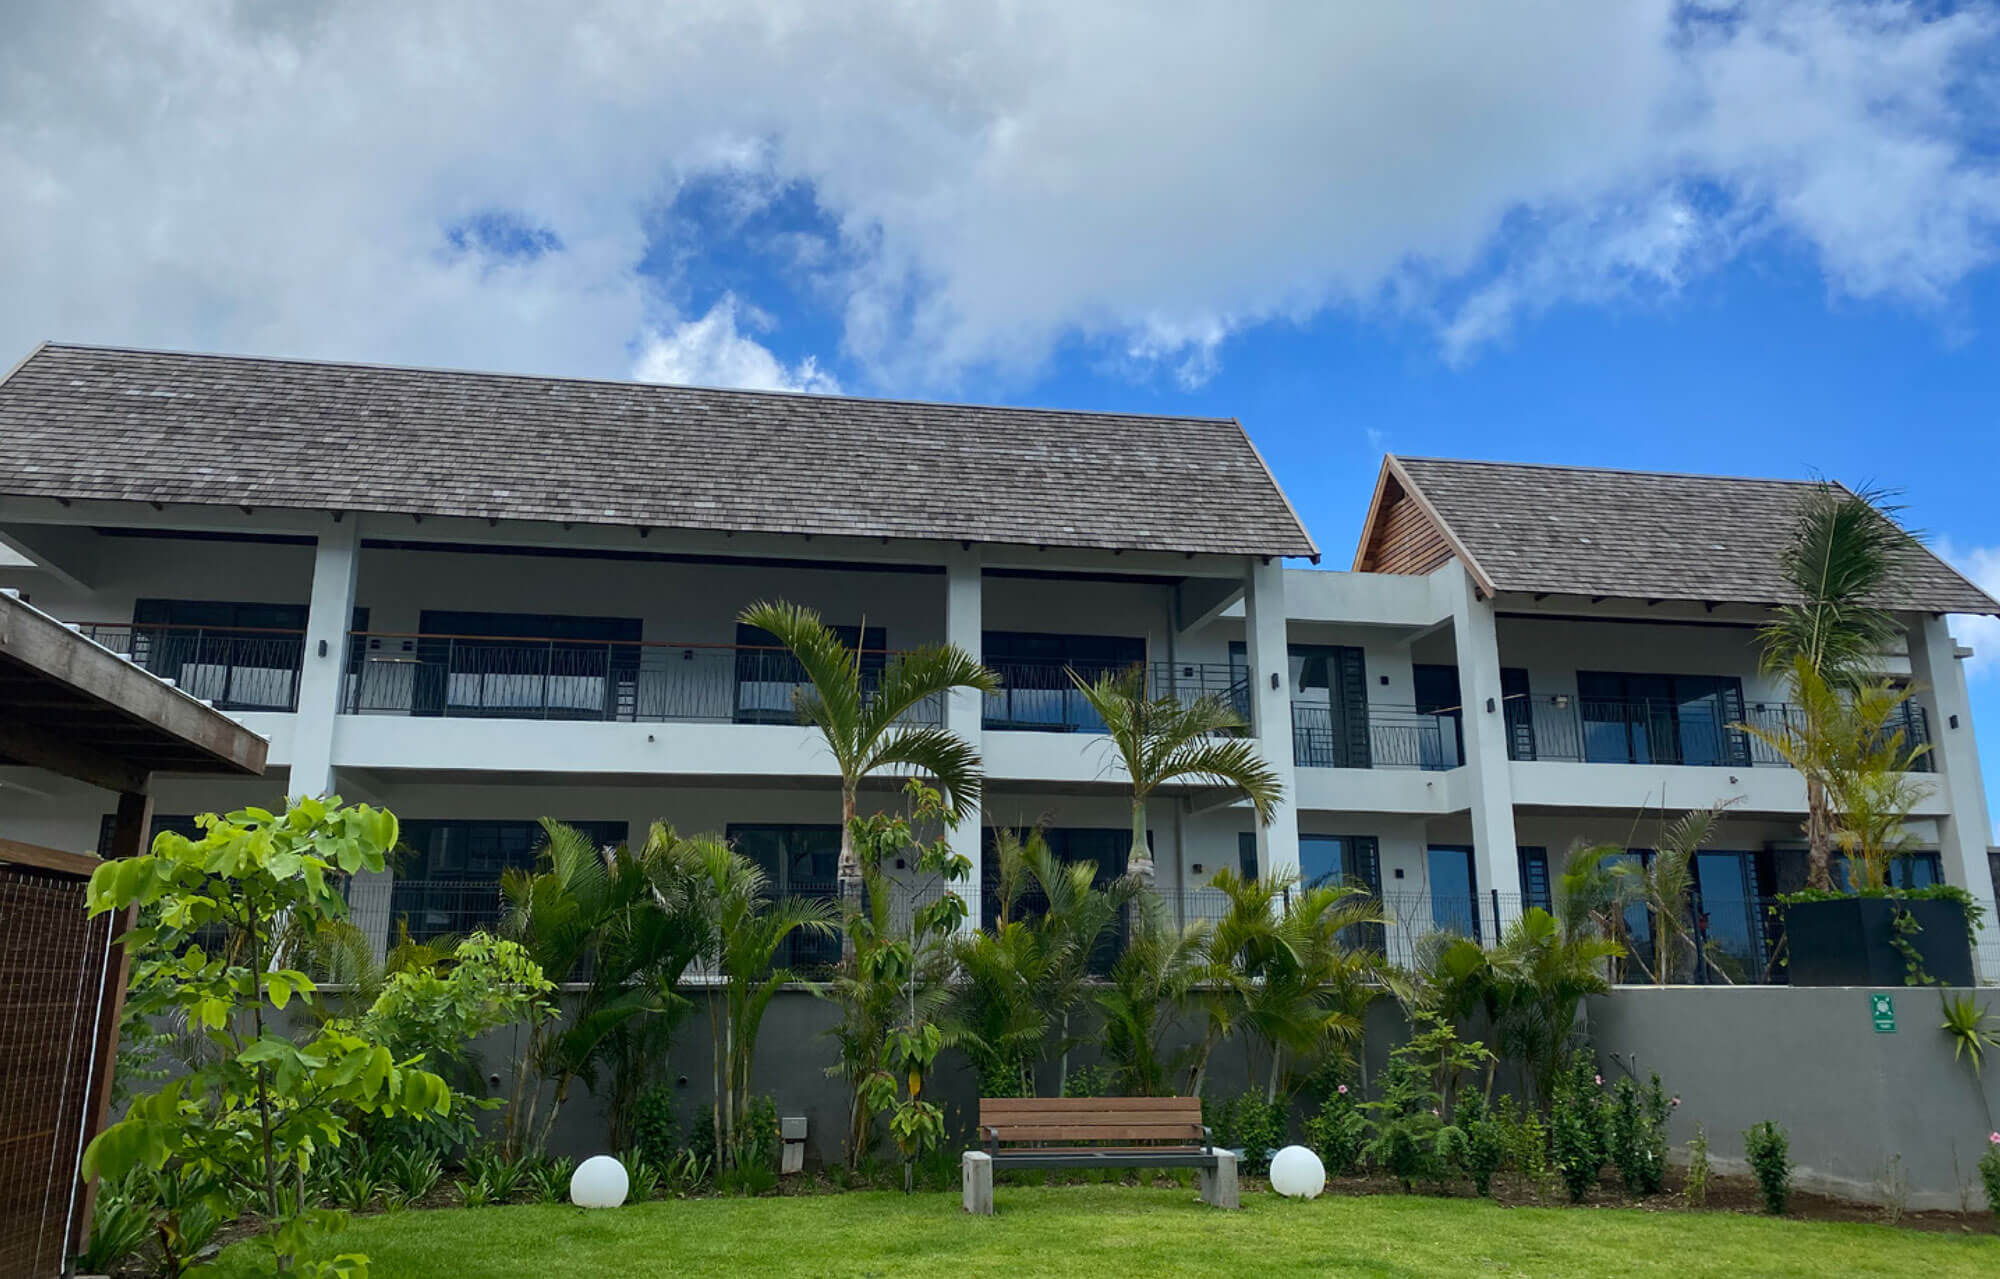 Premium services to enhance your lifestyle! Les Résidences de Mont Choisy is a collection of 20 boutique apartments. Luxurious decor coupled with a beach lifestyle inspires wellbeing in residents. Private and exclusive, this property development is in the north of Mauritius.